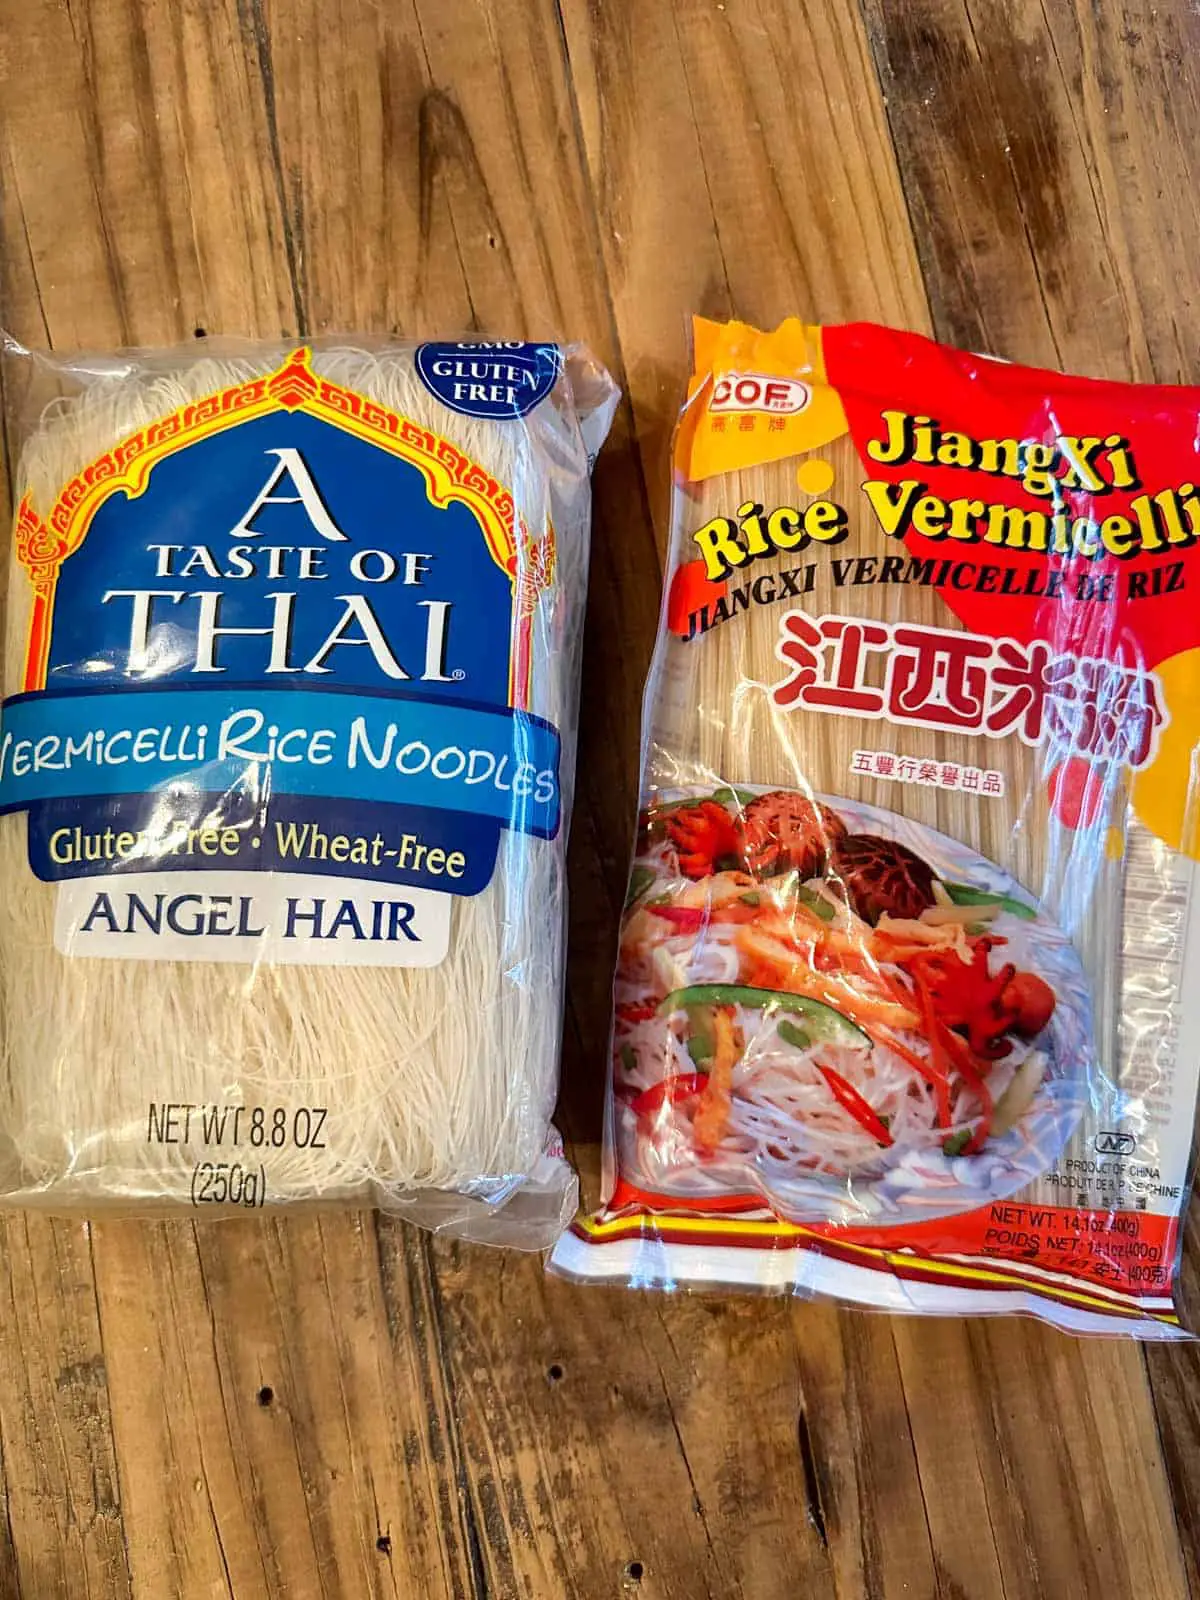 Package of A Taste of Thai Vermicelli Rice Noodles next to a package of Jiang Xi Rice Vermicelli Noodles on a wooden board background.